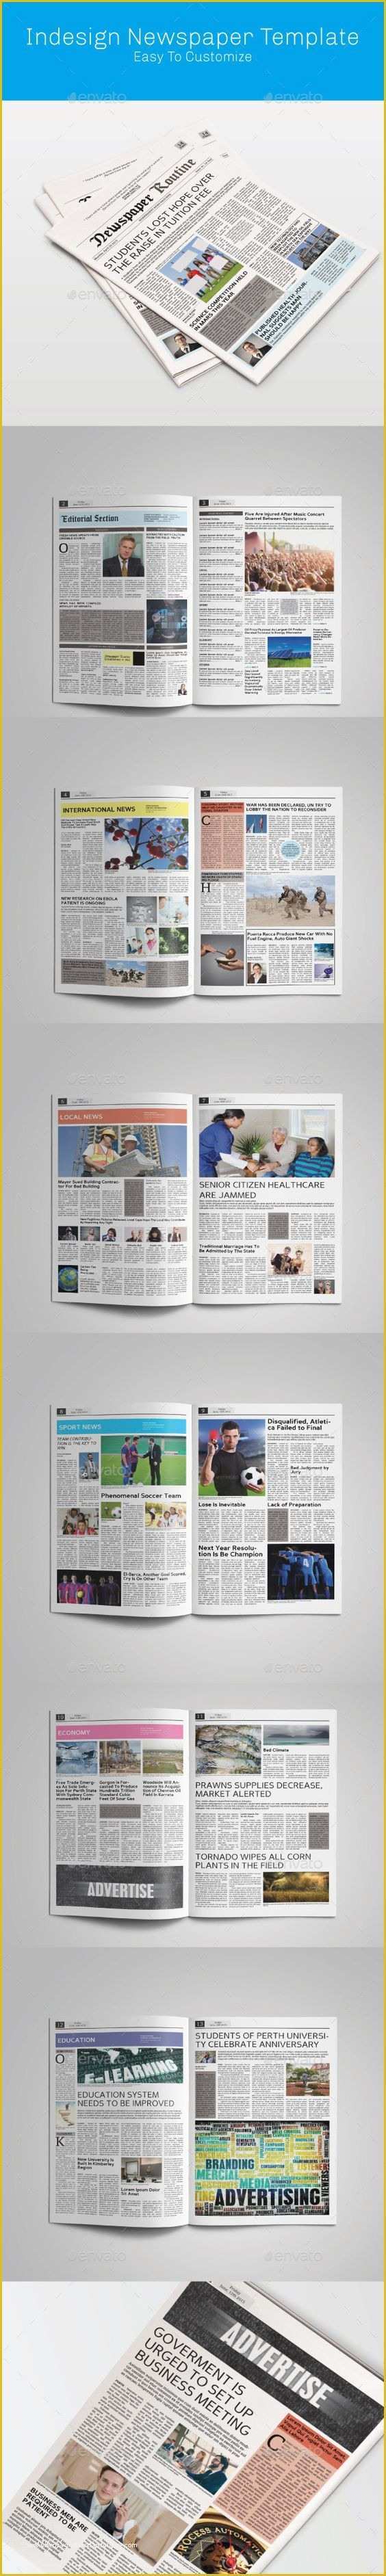 Indesign Newspaper Template Free Of Templates Newspaper and Design On Pinterest